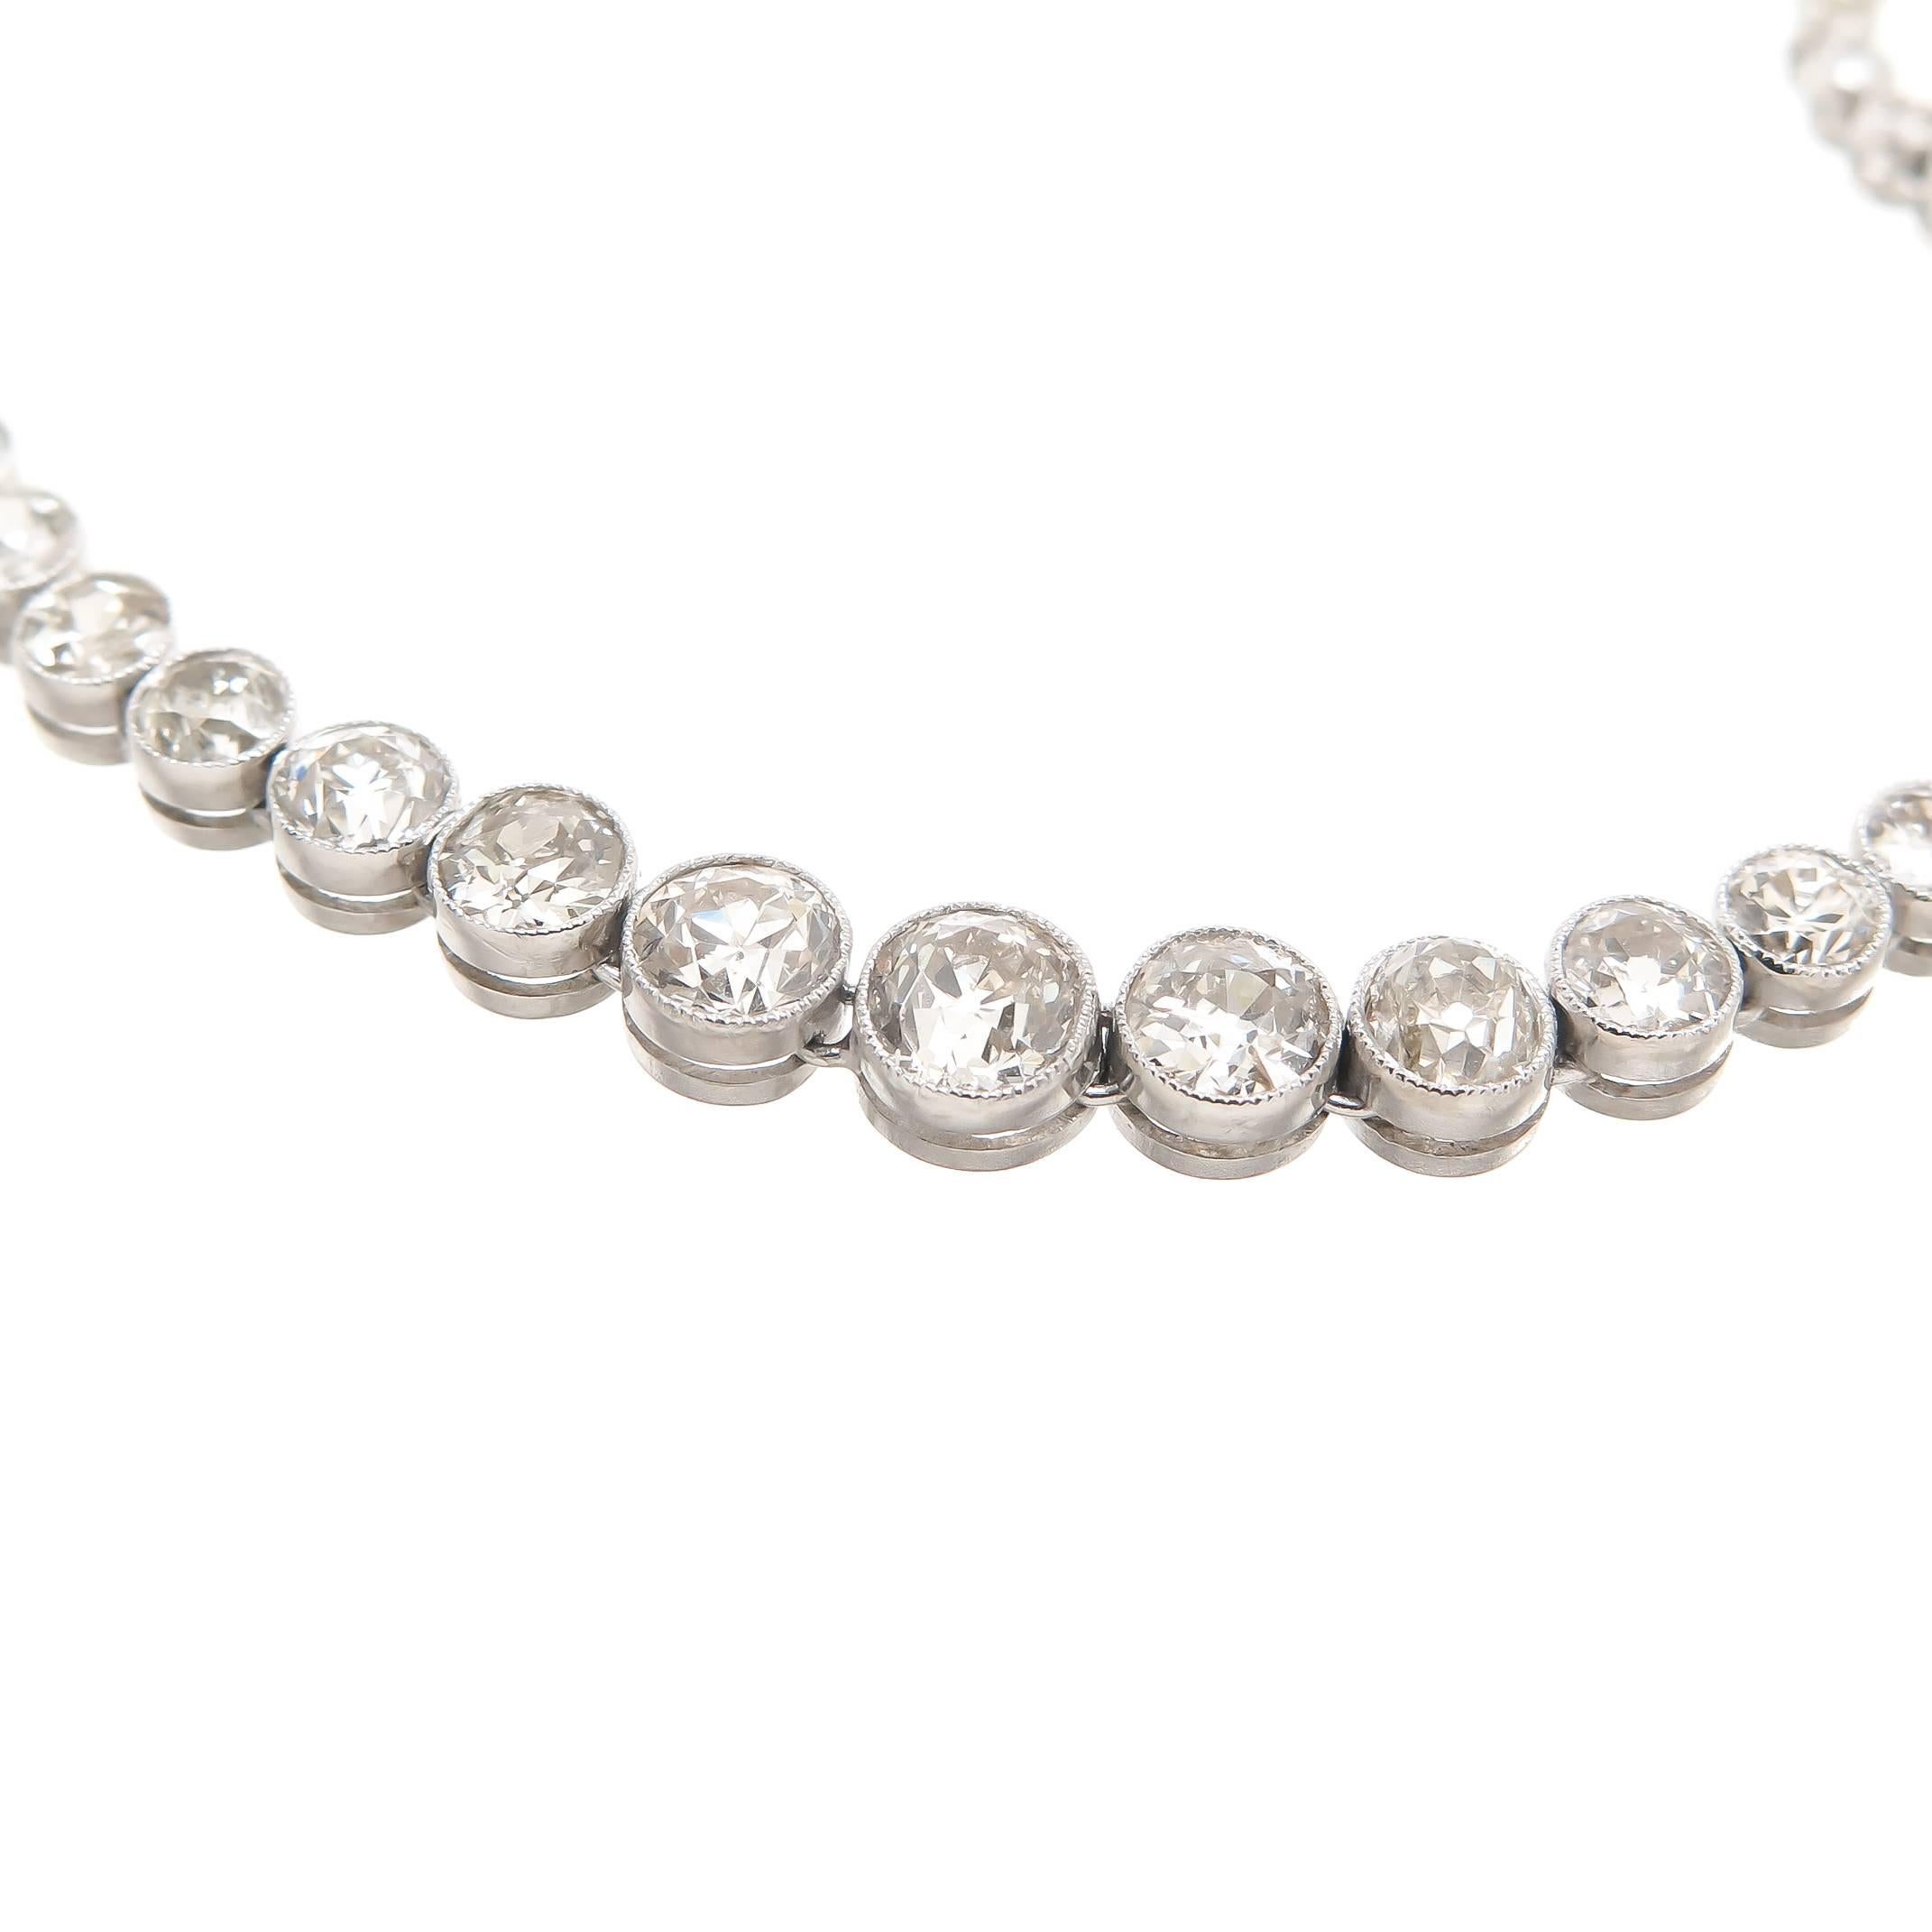 Platinum Riviere graduated necklace, Bezel set with old Mine cut Diamonds, and having Milgrain edges. Total  Diamond Weight 11.24 Carats and grading as H to K in color and VS to SI in clarity. Total necklace length 16 inch.